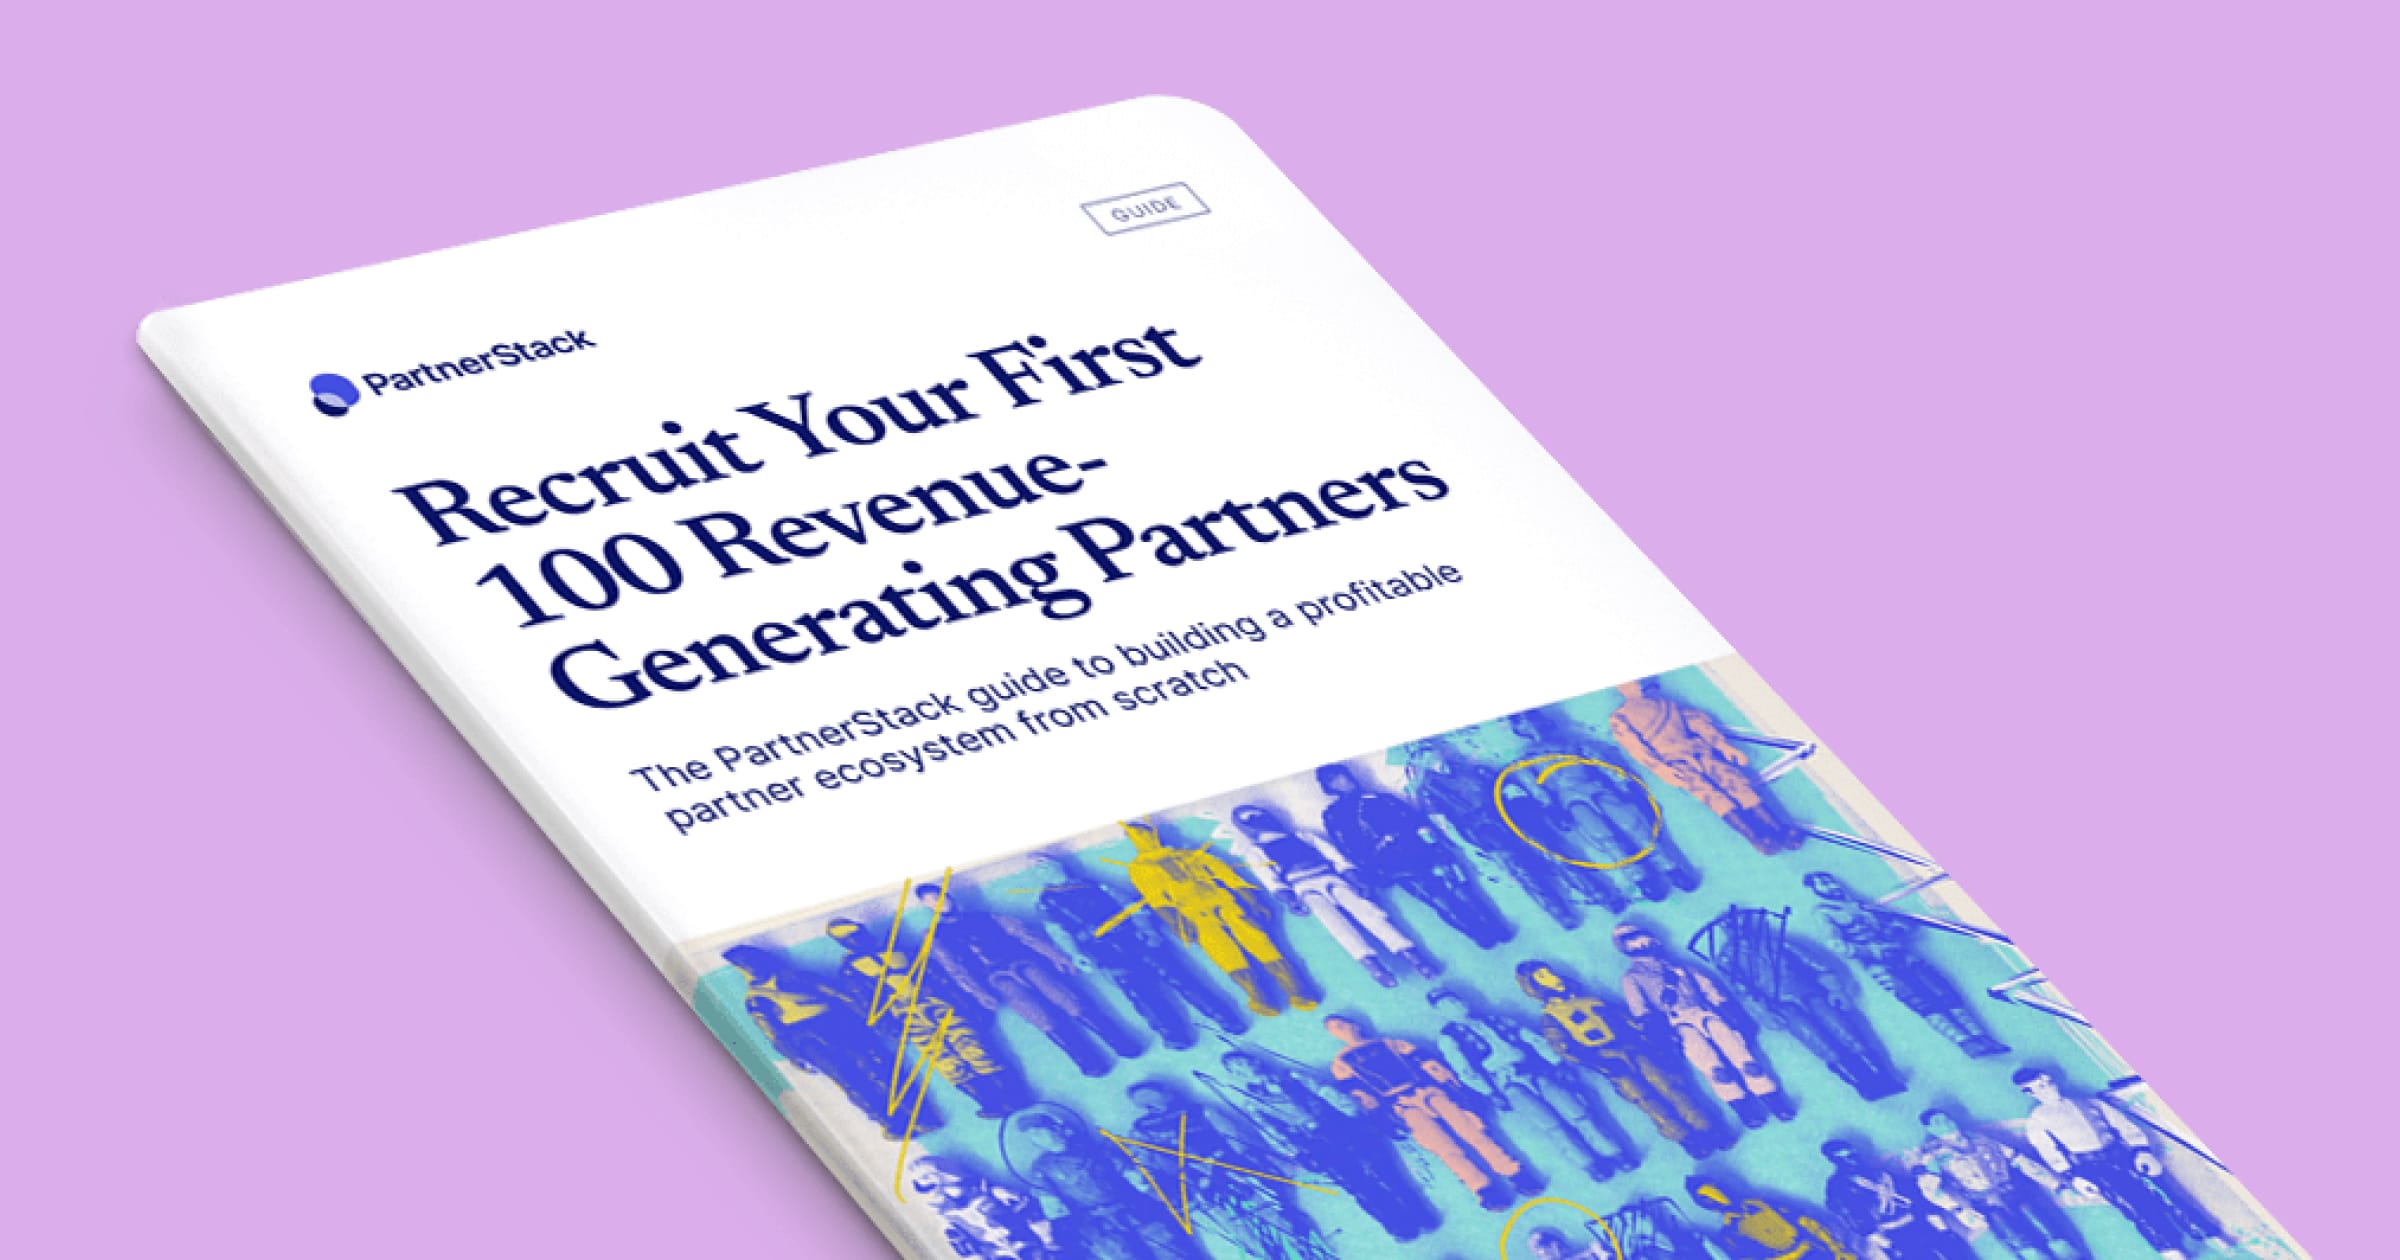 Recruit Your First 100 Revenue-Generating Partners Guide